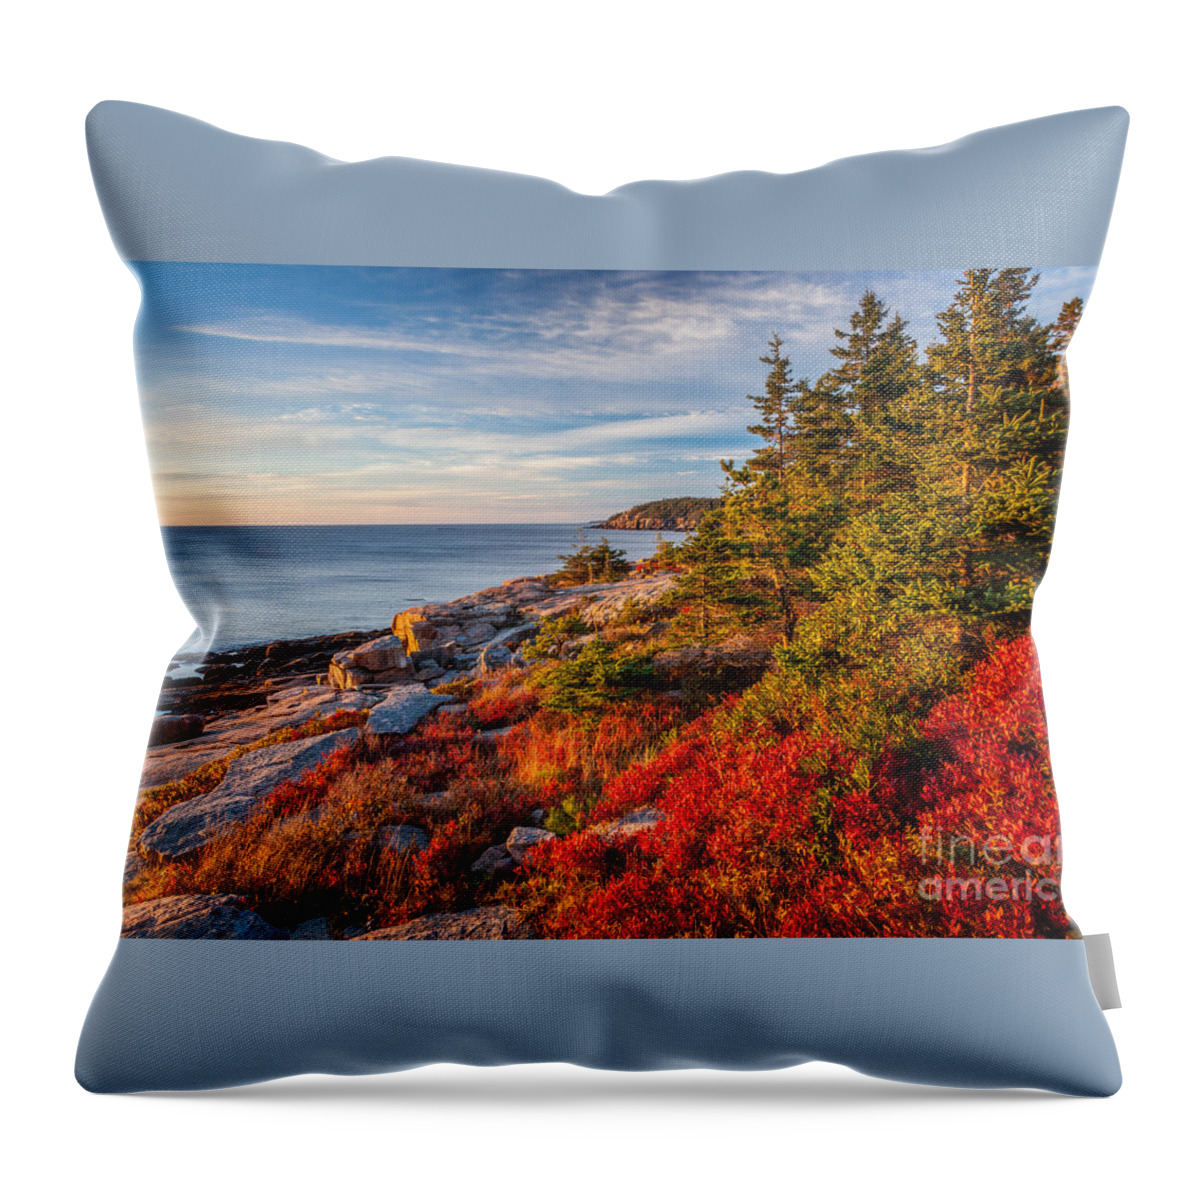 Acadia National Park Throw Pillow featuring the photograph Autumn Shore in Acadia by Susan Cole Kelly